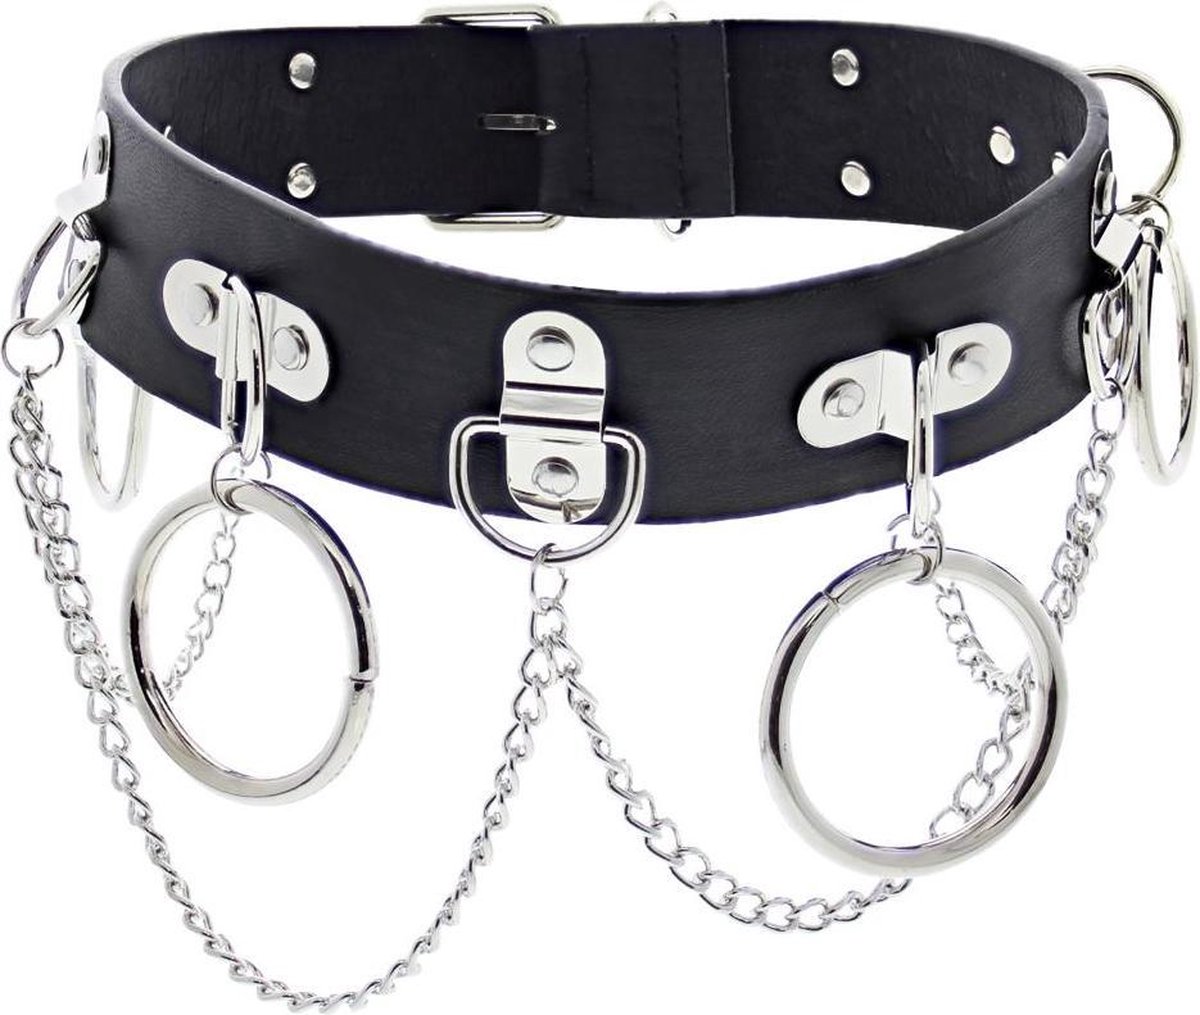 Zac's Alter Ego Riem -XL- Wrap Round with rings and chains Zwart